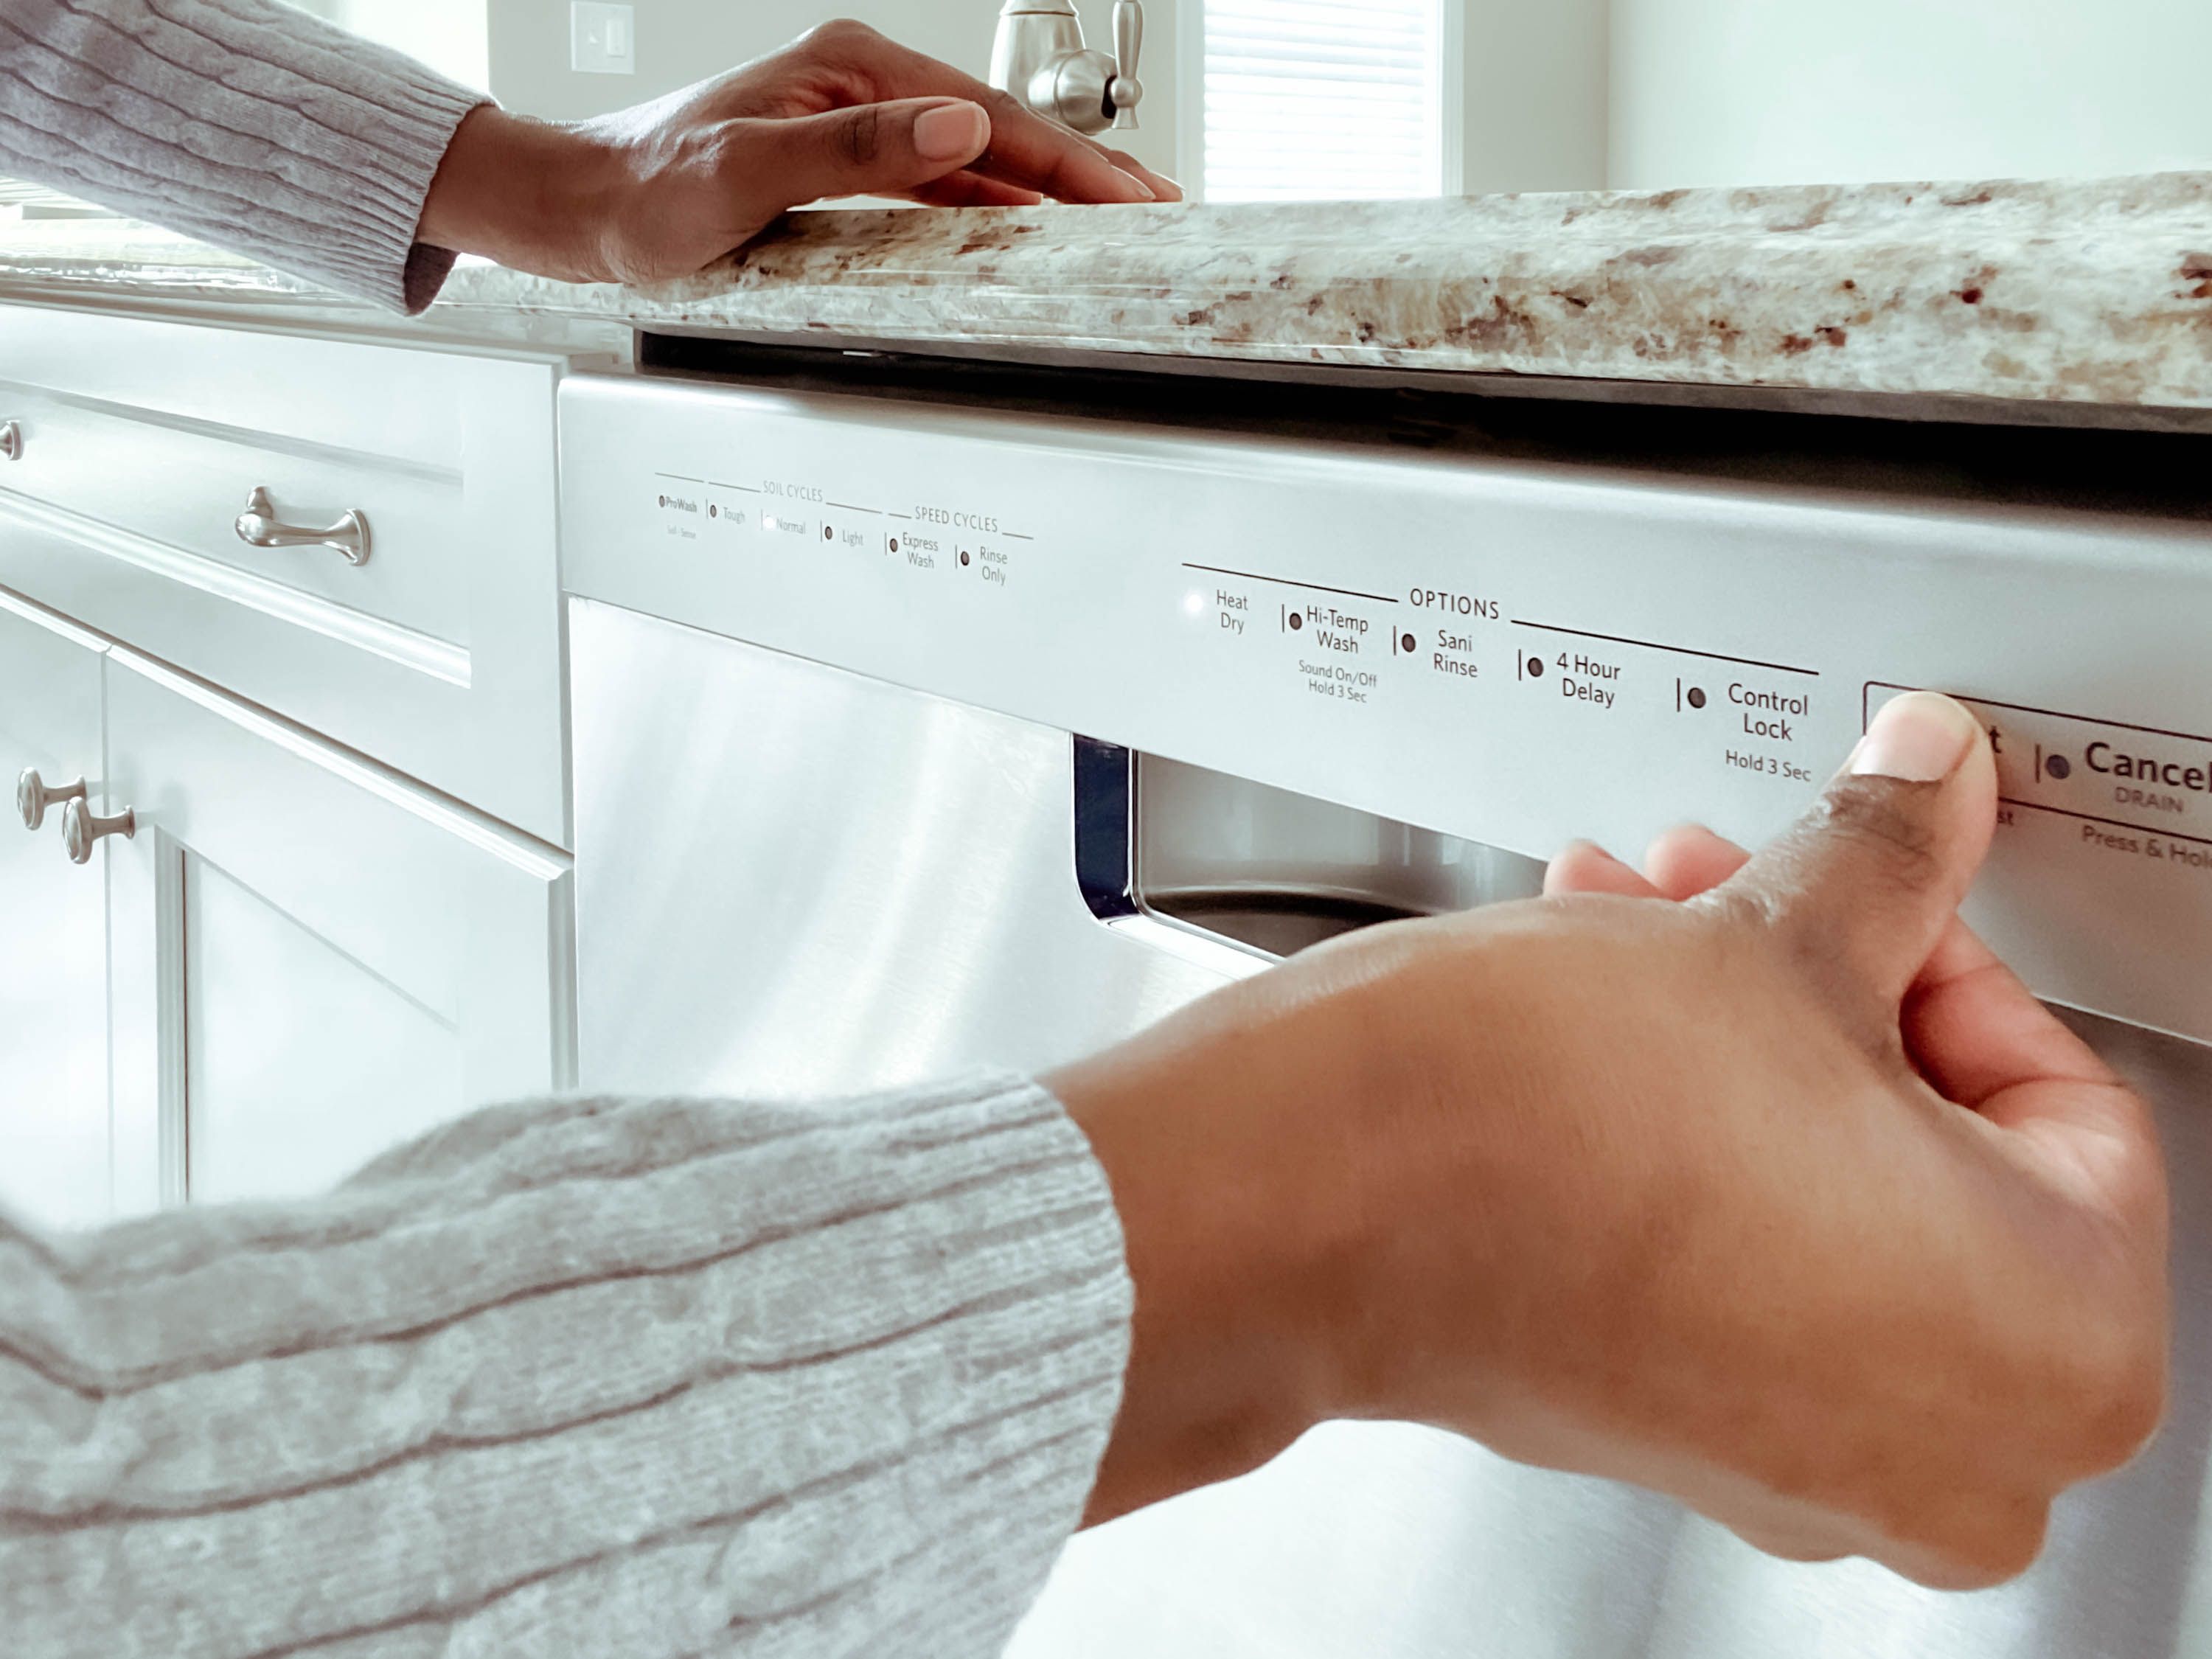 No Space for a Dishwasher? Try a Drawer - Consumers Voice